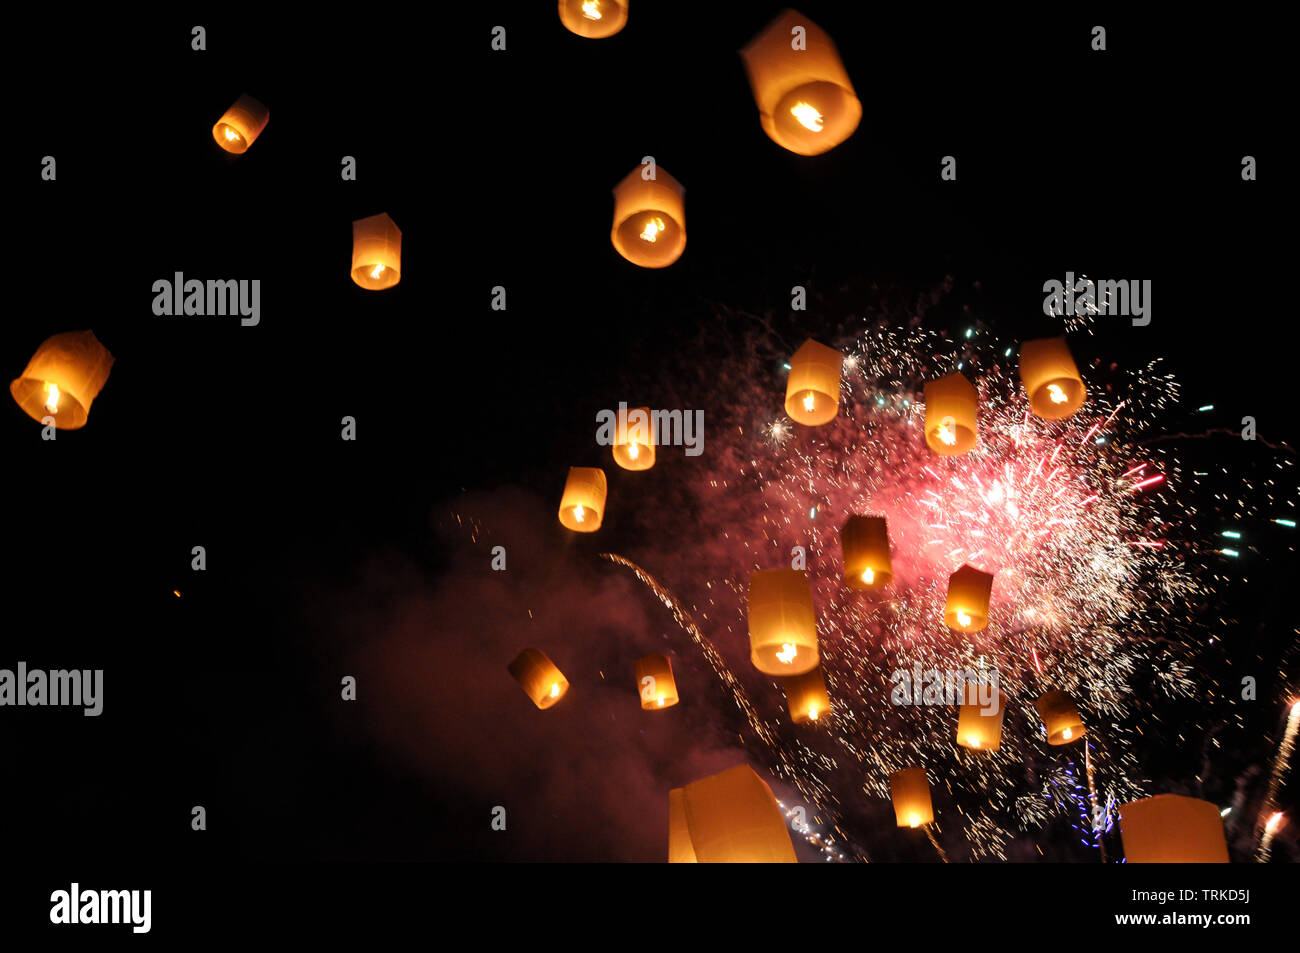 Festival Lantern lift-off with fireworks Stock Photo